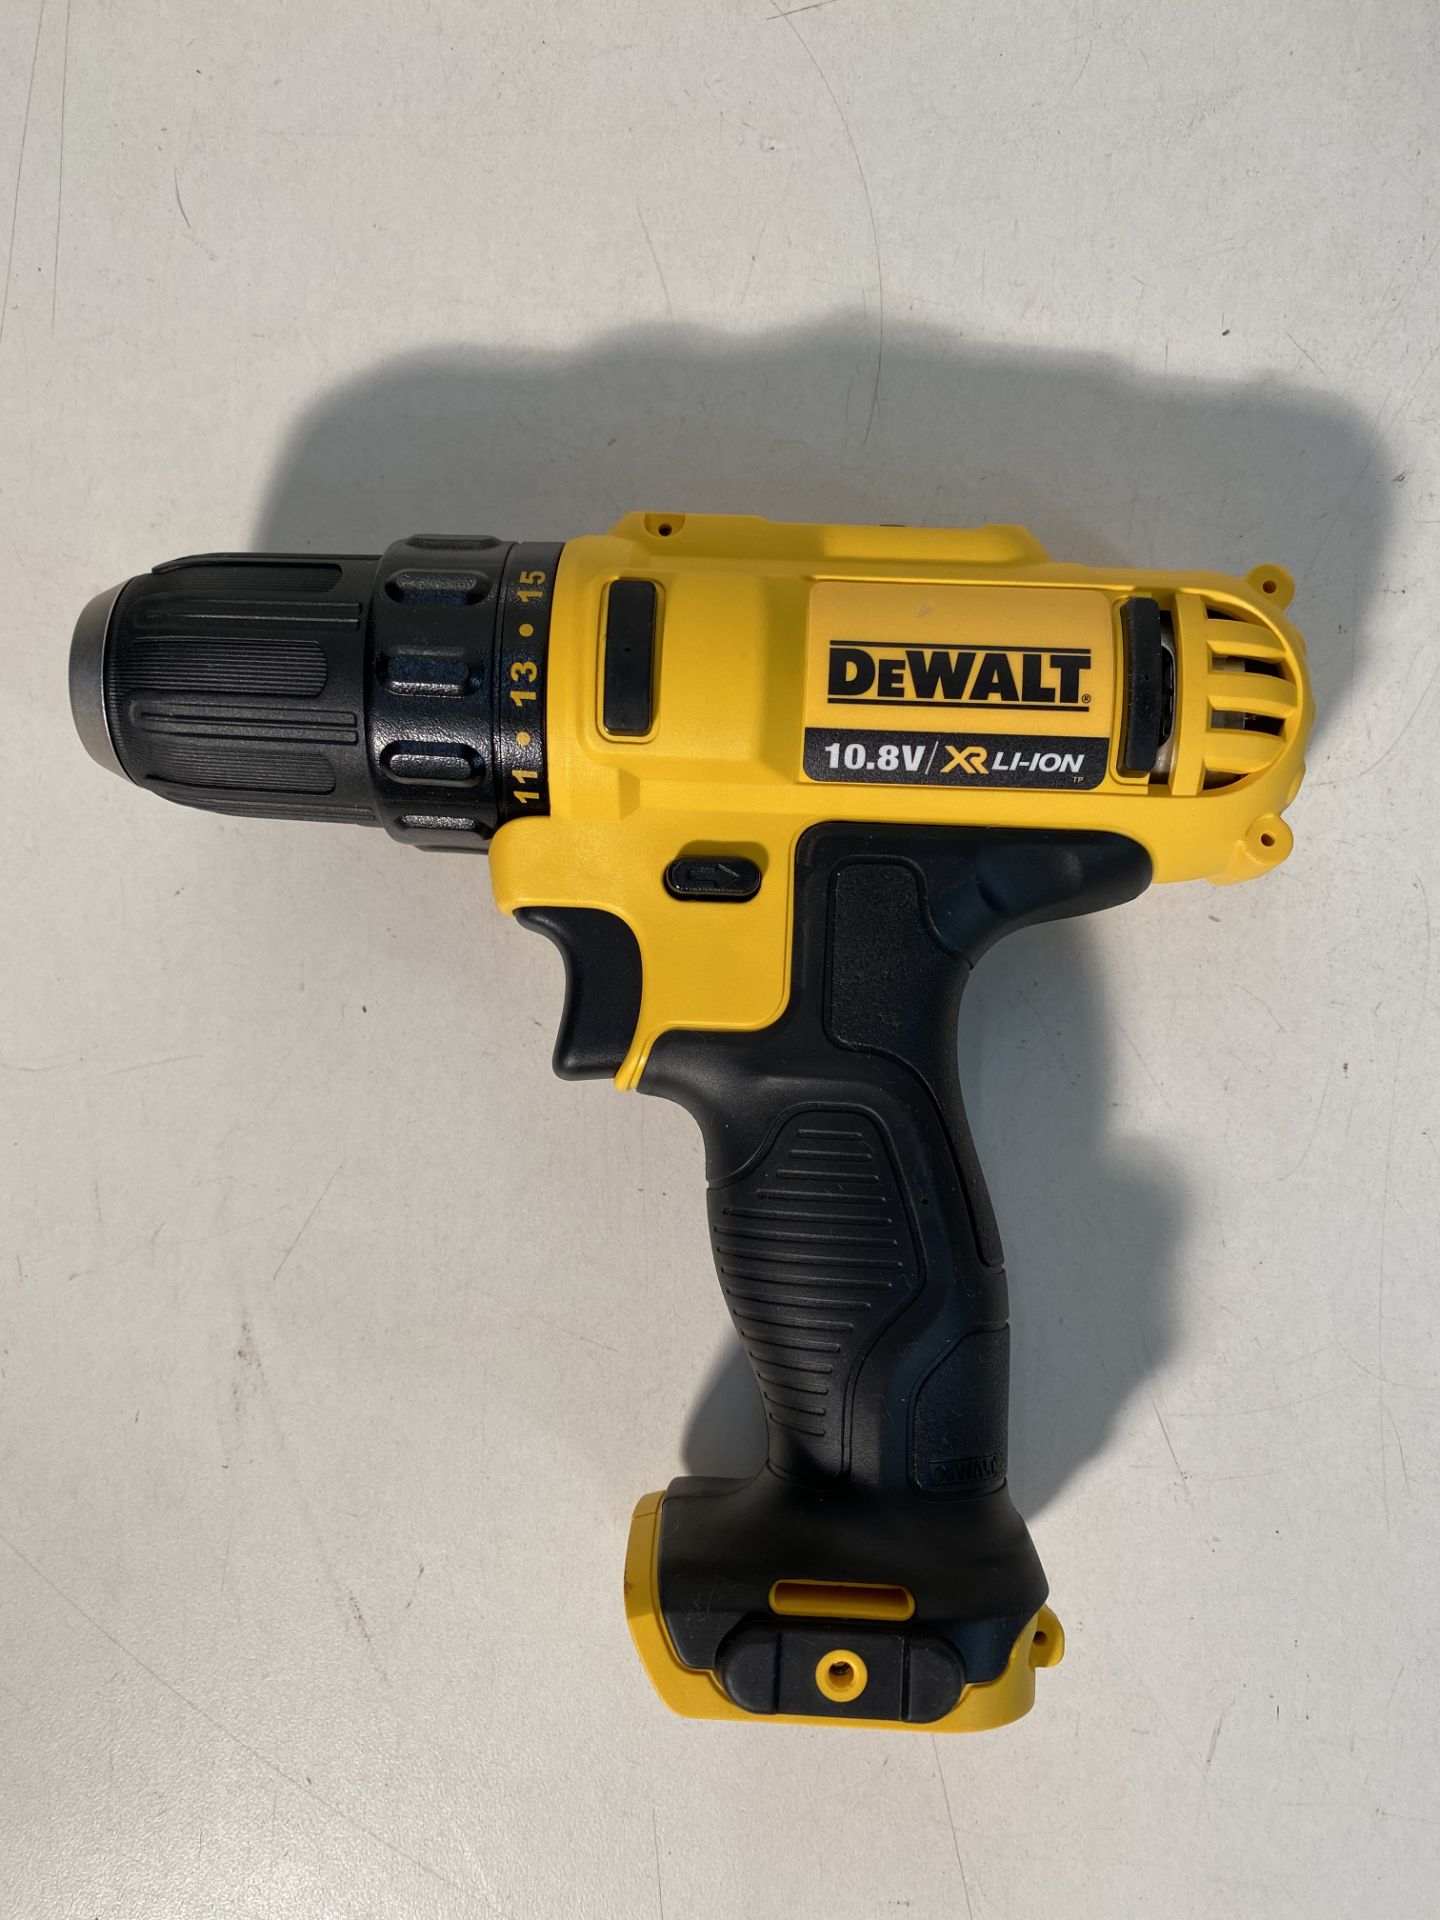 2 x DeWalt DCD710 10.8V XR Cordless Compact Drill Driver (Body Only) - Image 2 of 4